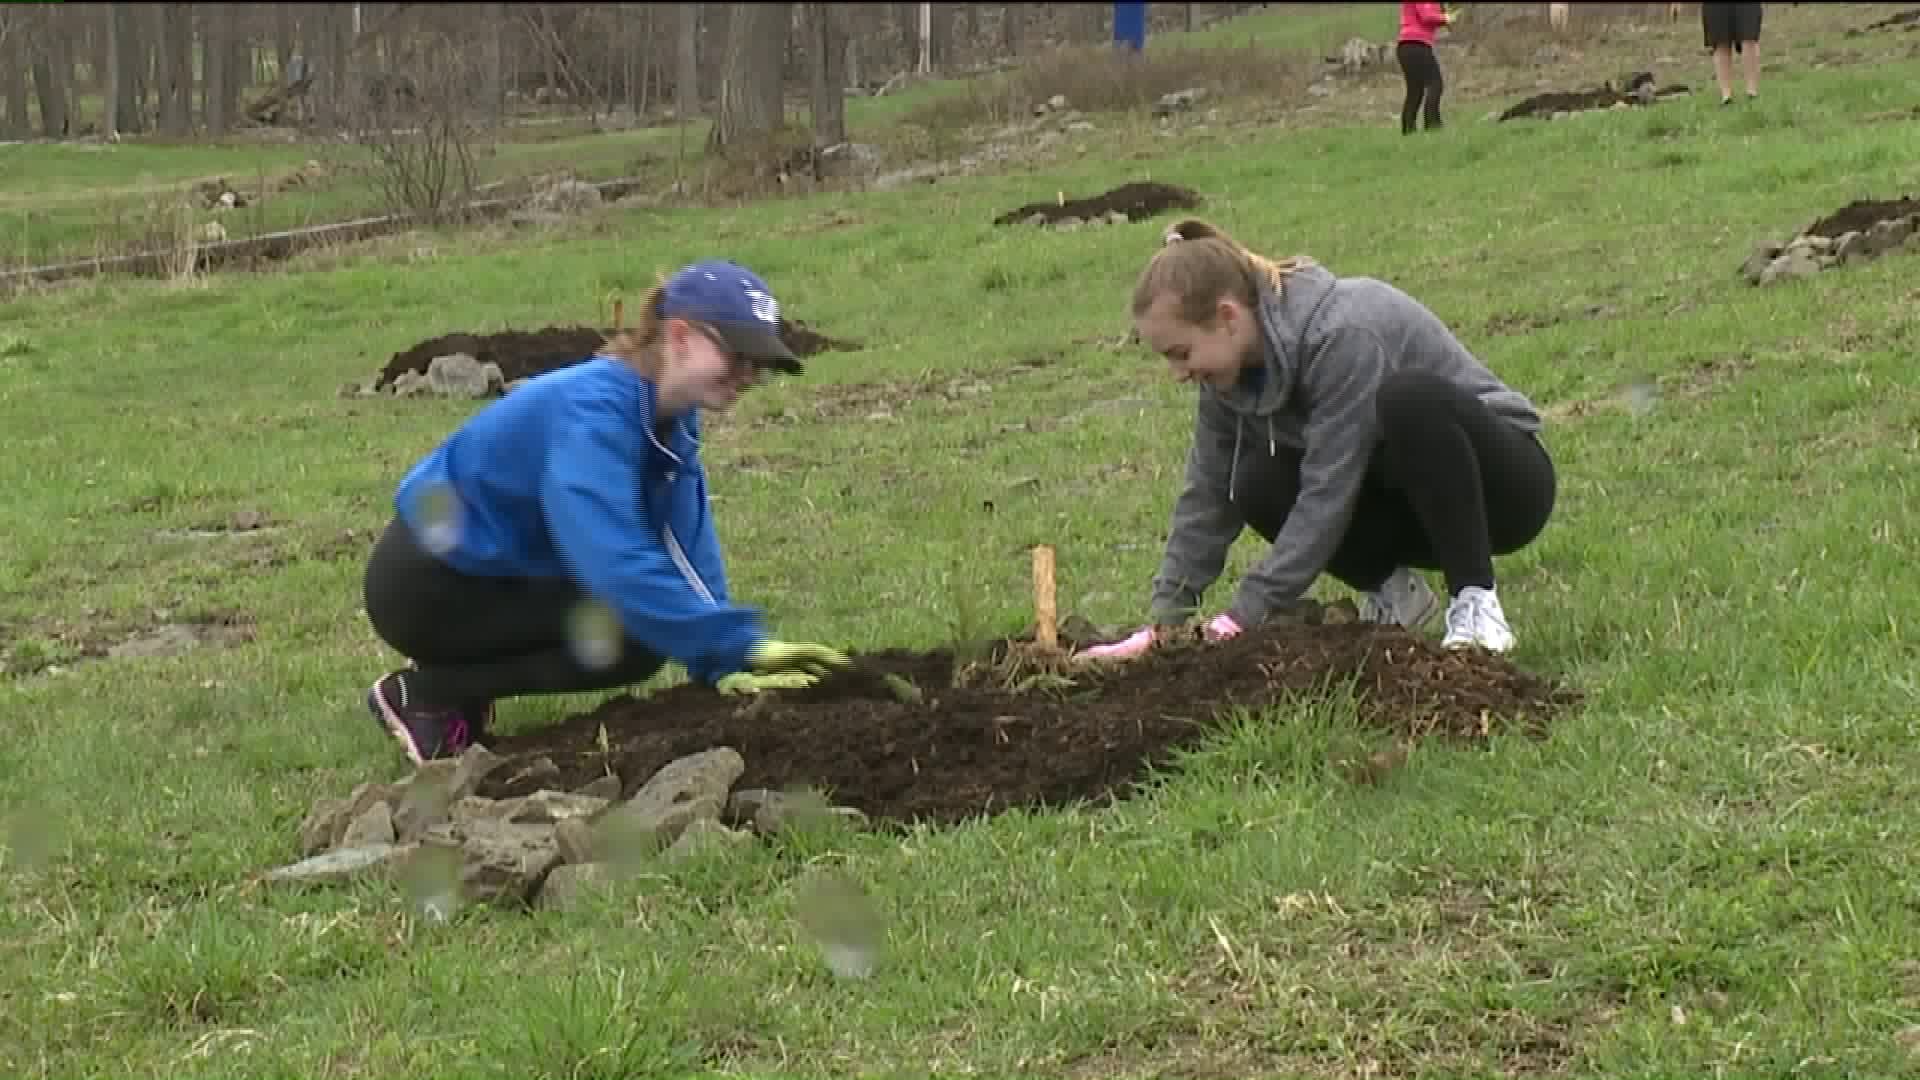 Volunteers Celebrate Earth Day by Planting Trees on Ski Slope